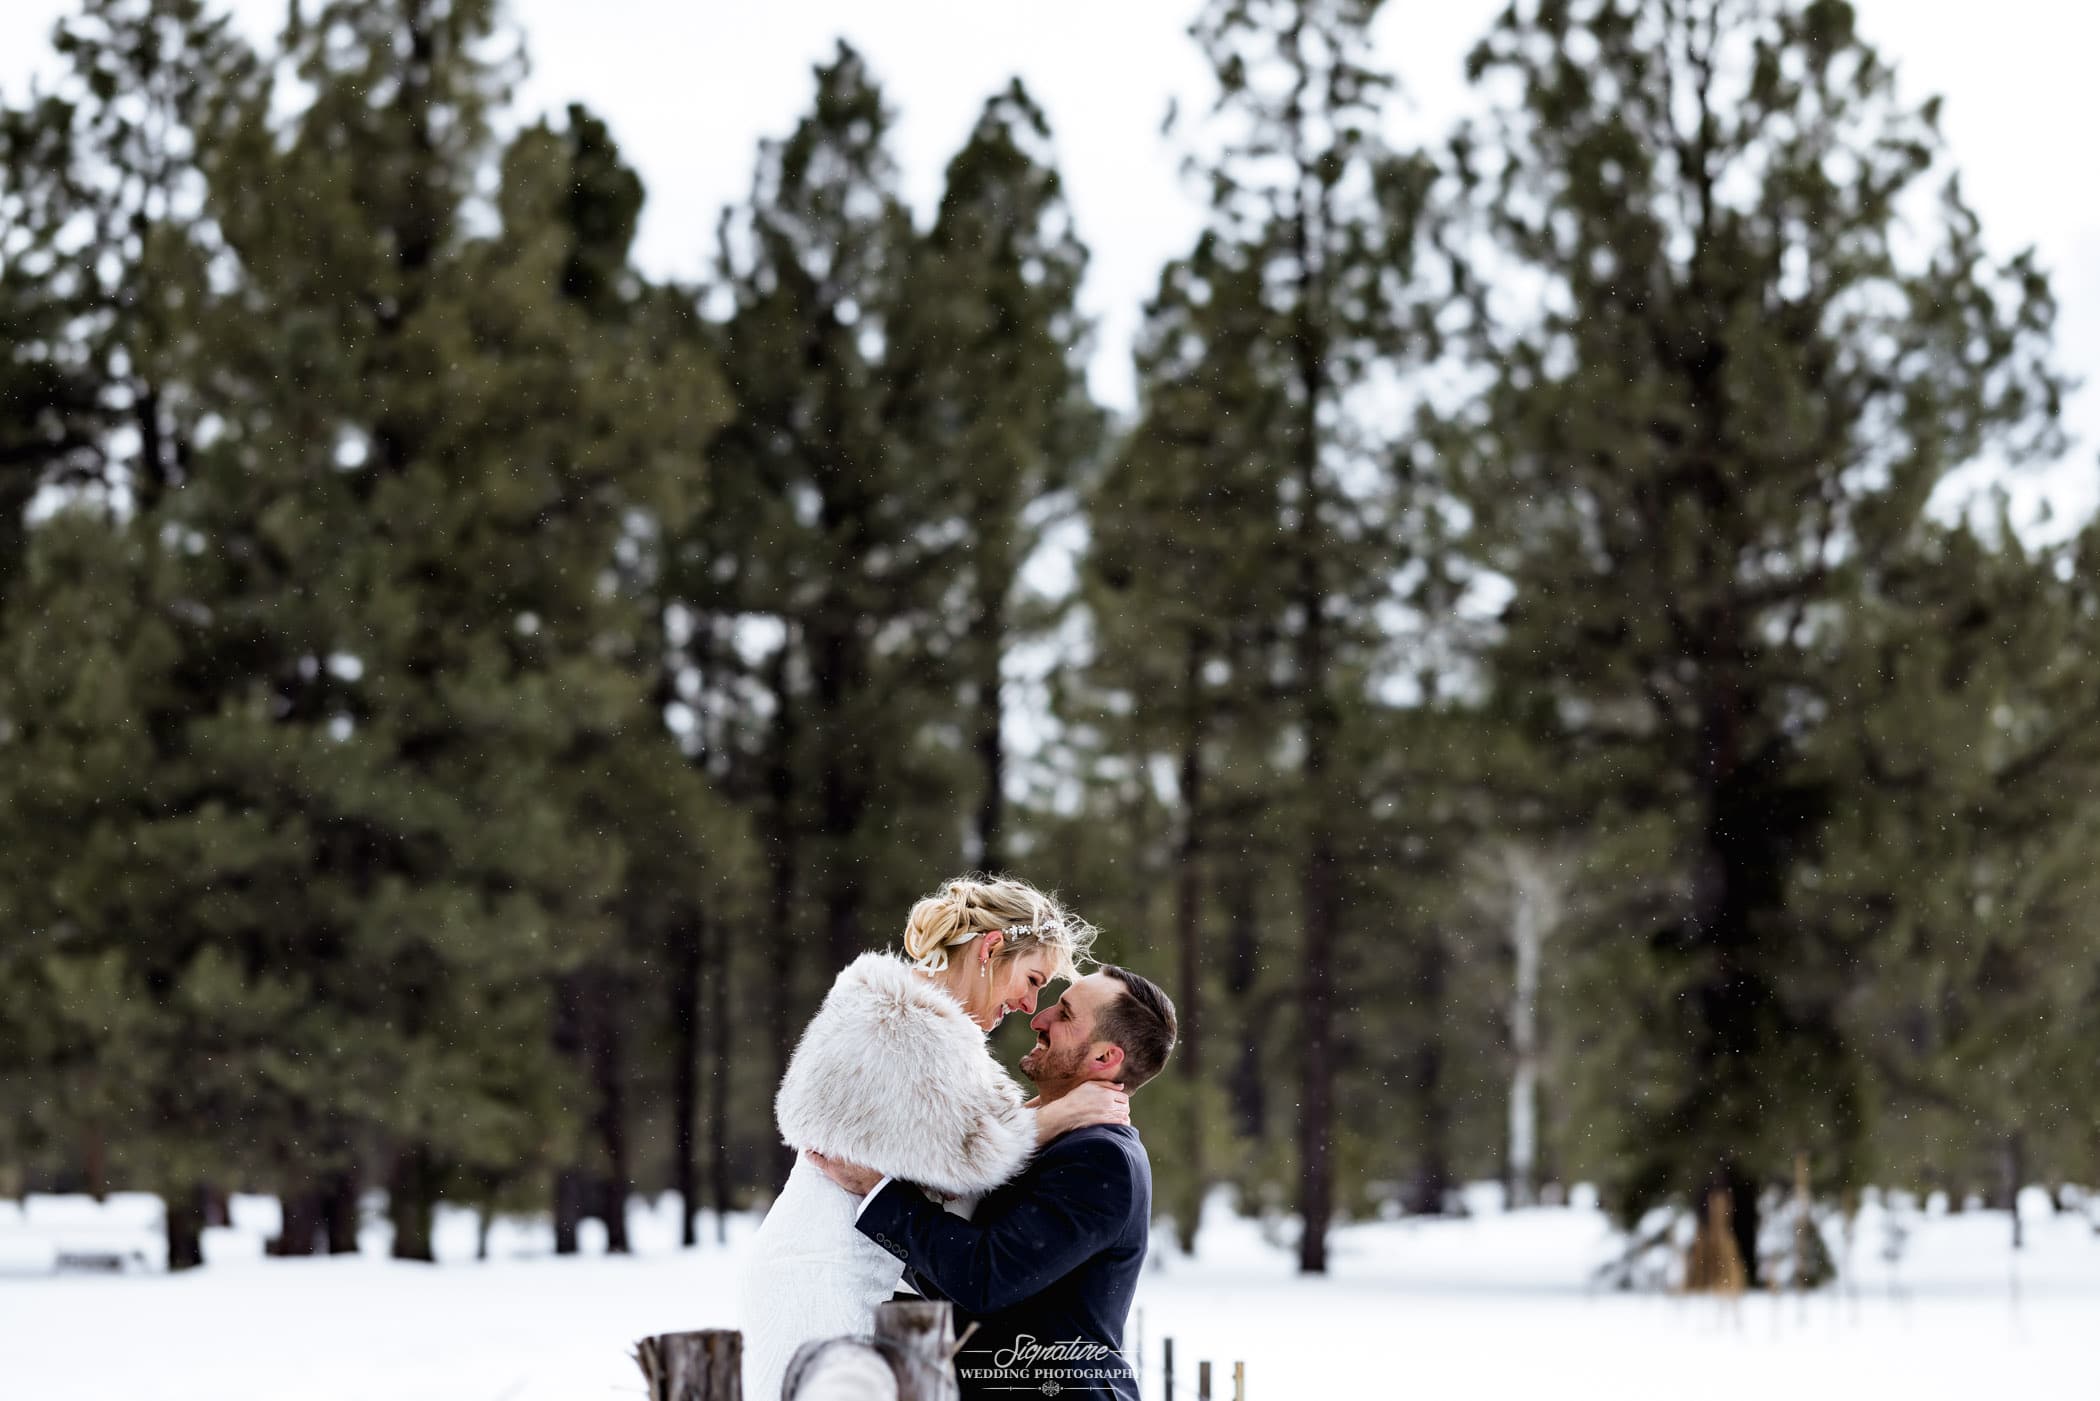 Bride and groom nose to nose smiling in snow